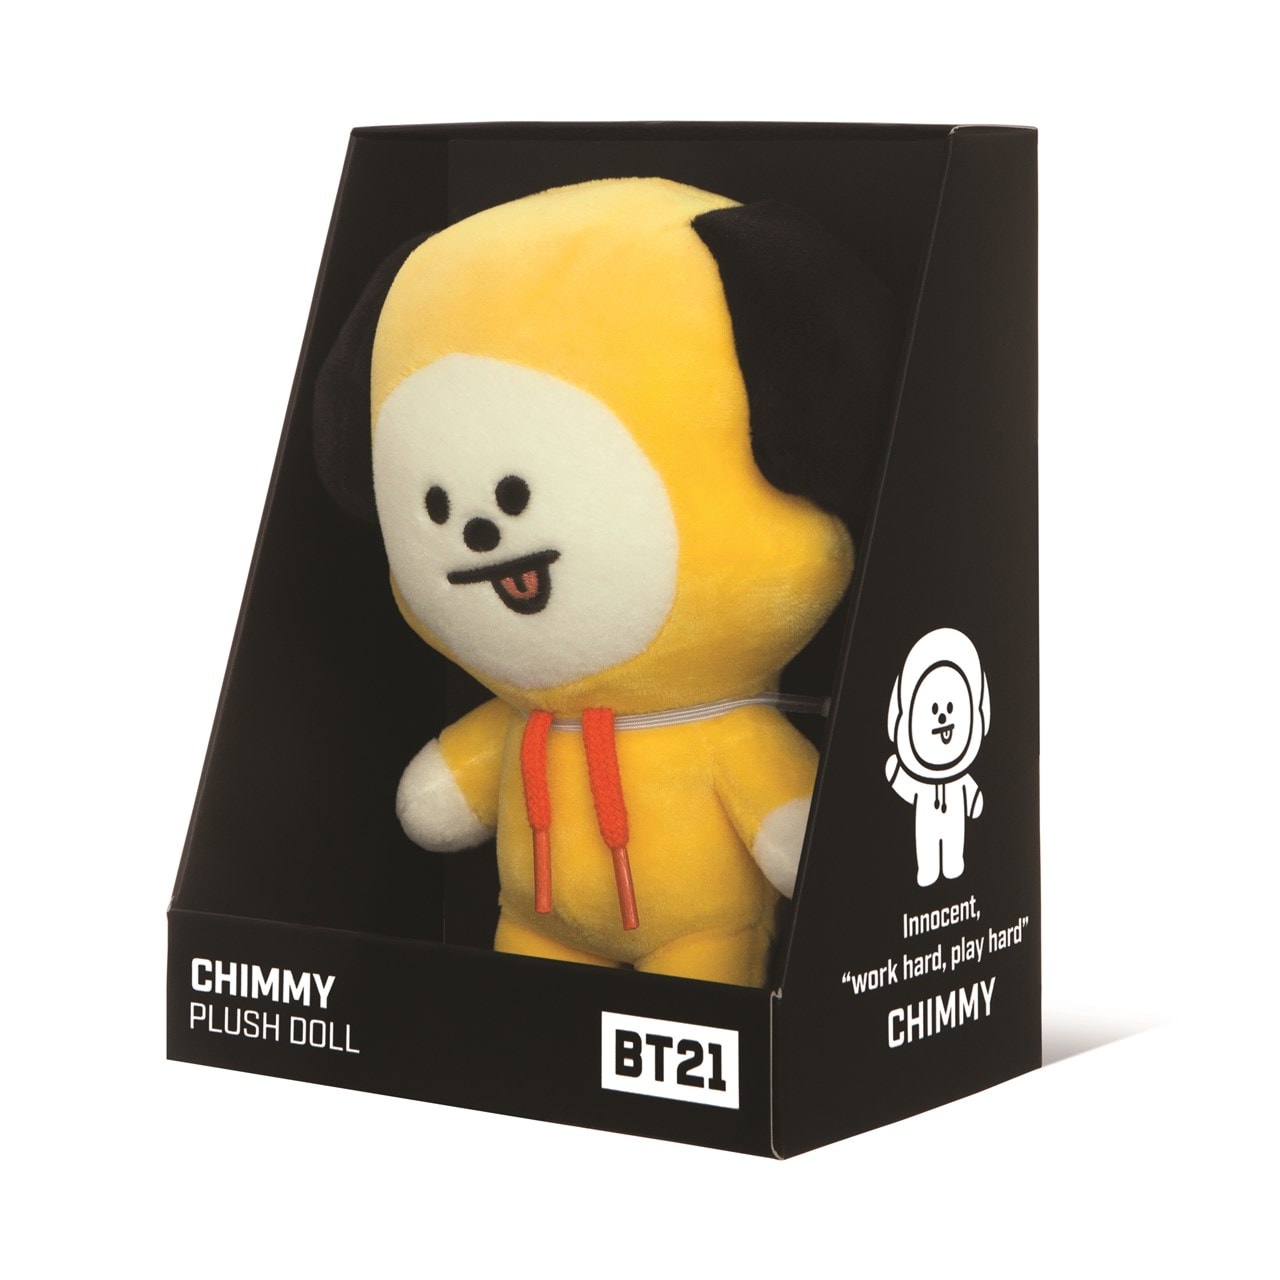  Chimmy  BT21  Small Plush Plush Free shipping over 20 